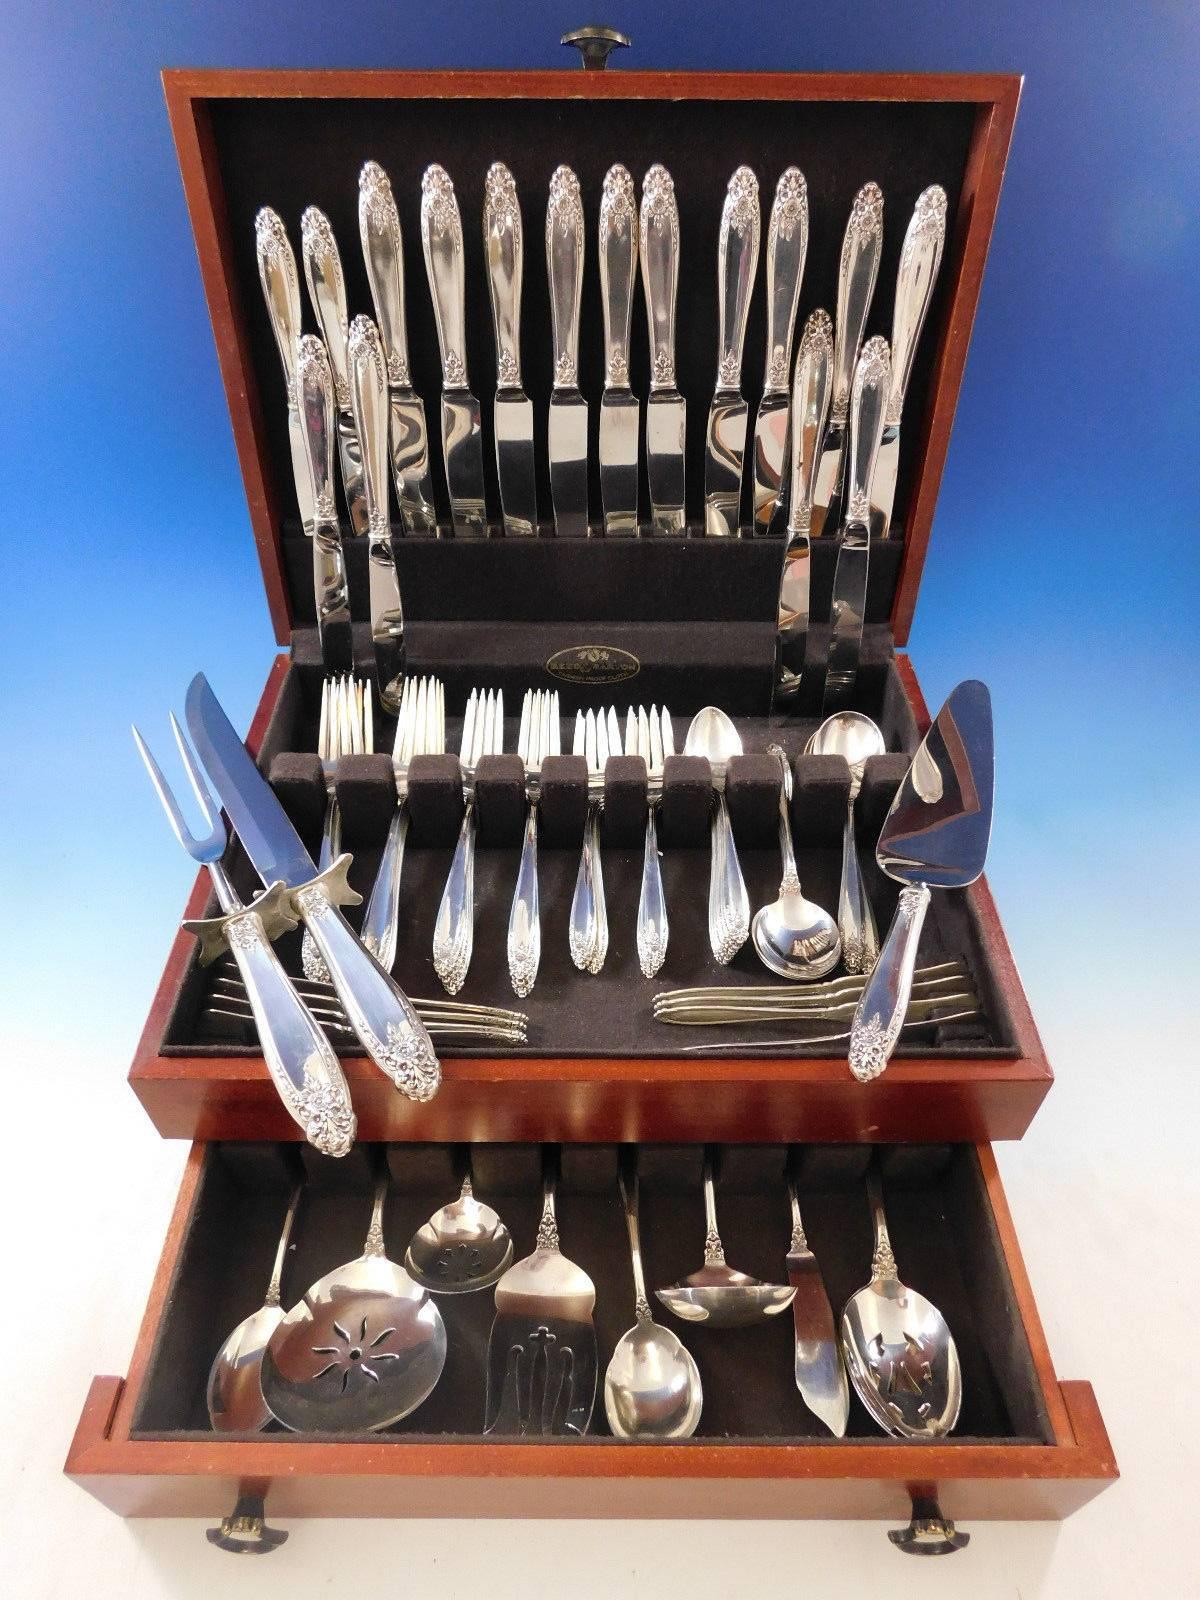 Impressive Prelude by International sterling silver Flatware set - 76 pieces. This set includes:

Measure: Eight dinner size knives, 9 5/8